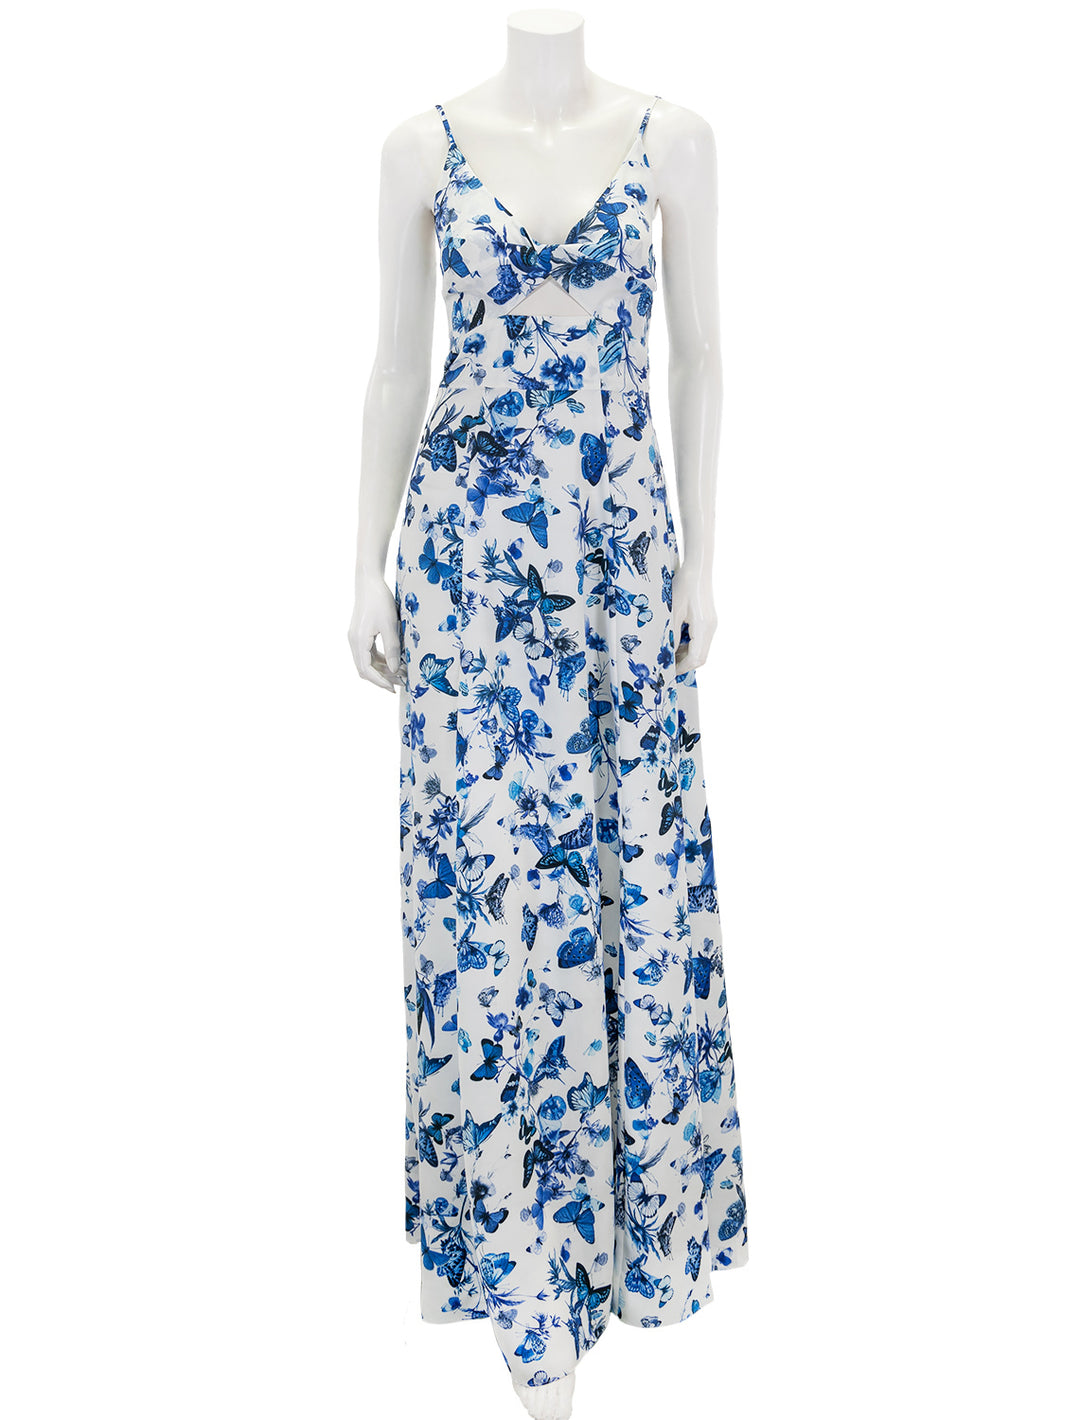 Front view of L'agence's porter twisted front dress in white and blue.